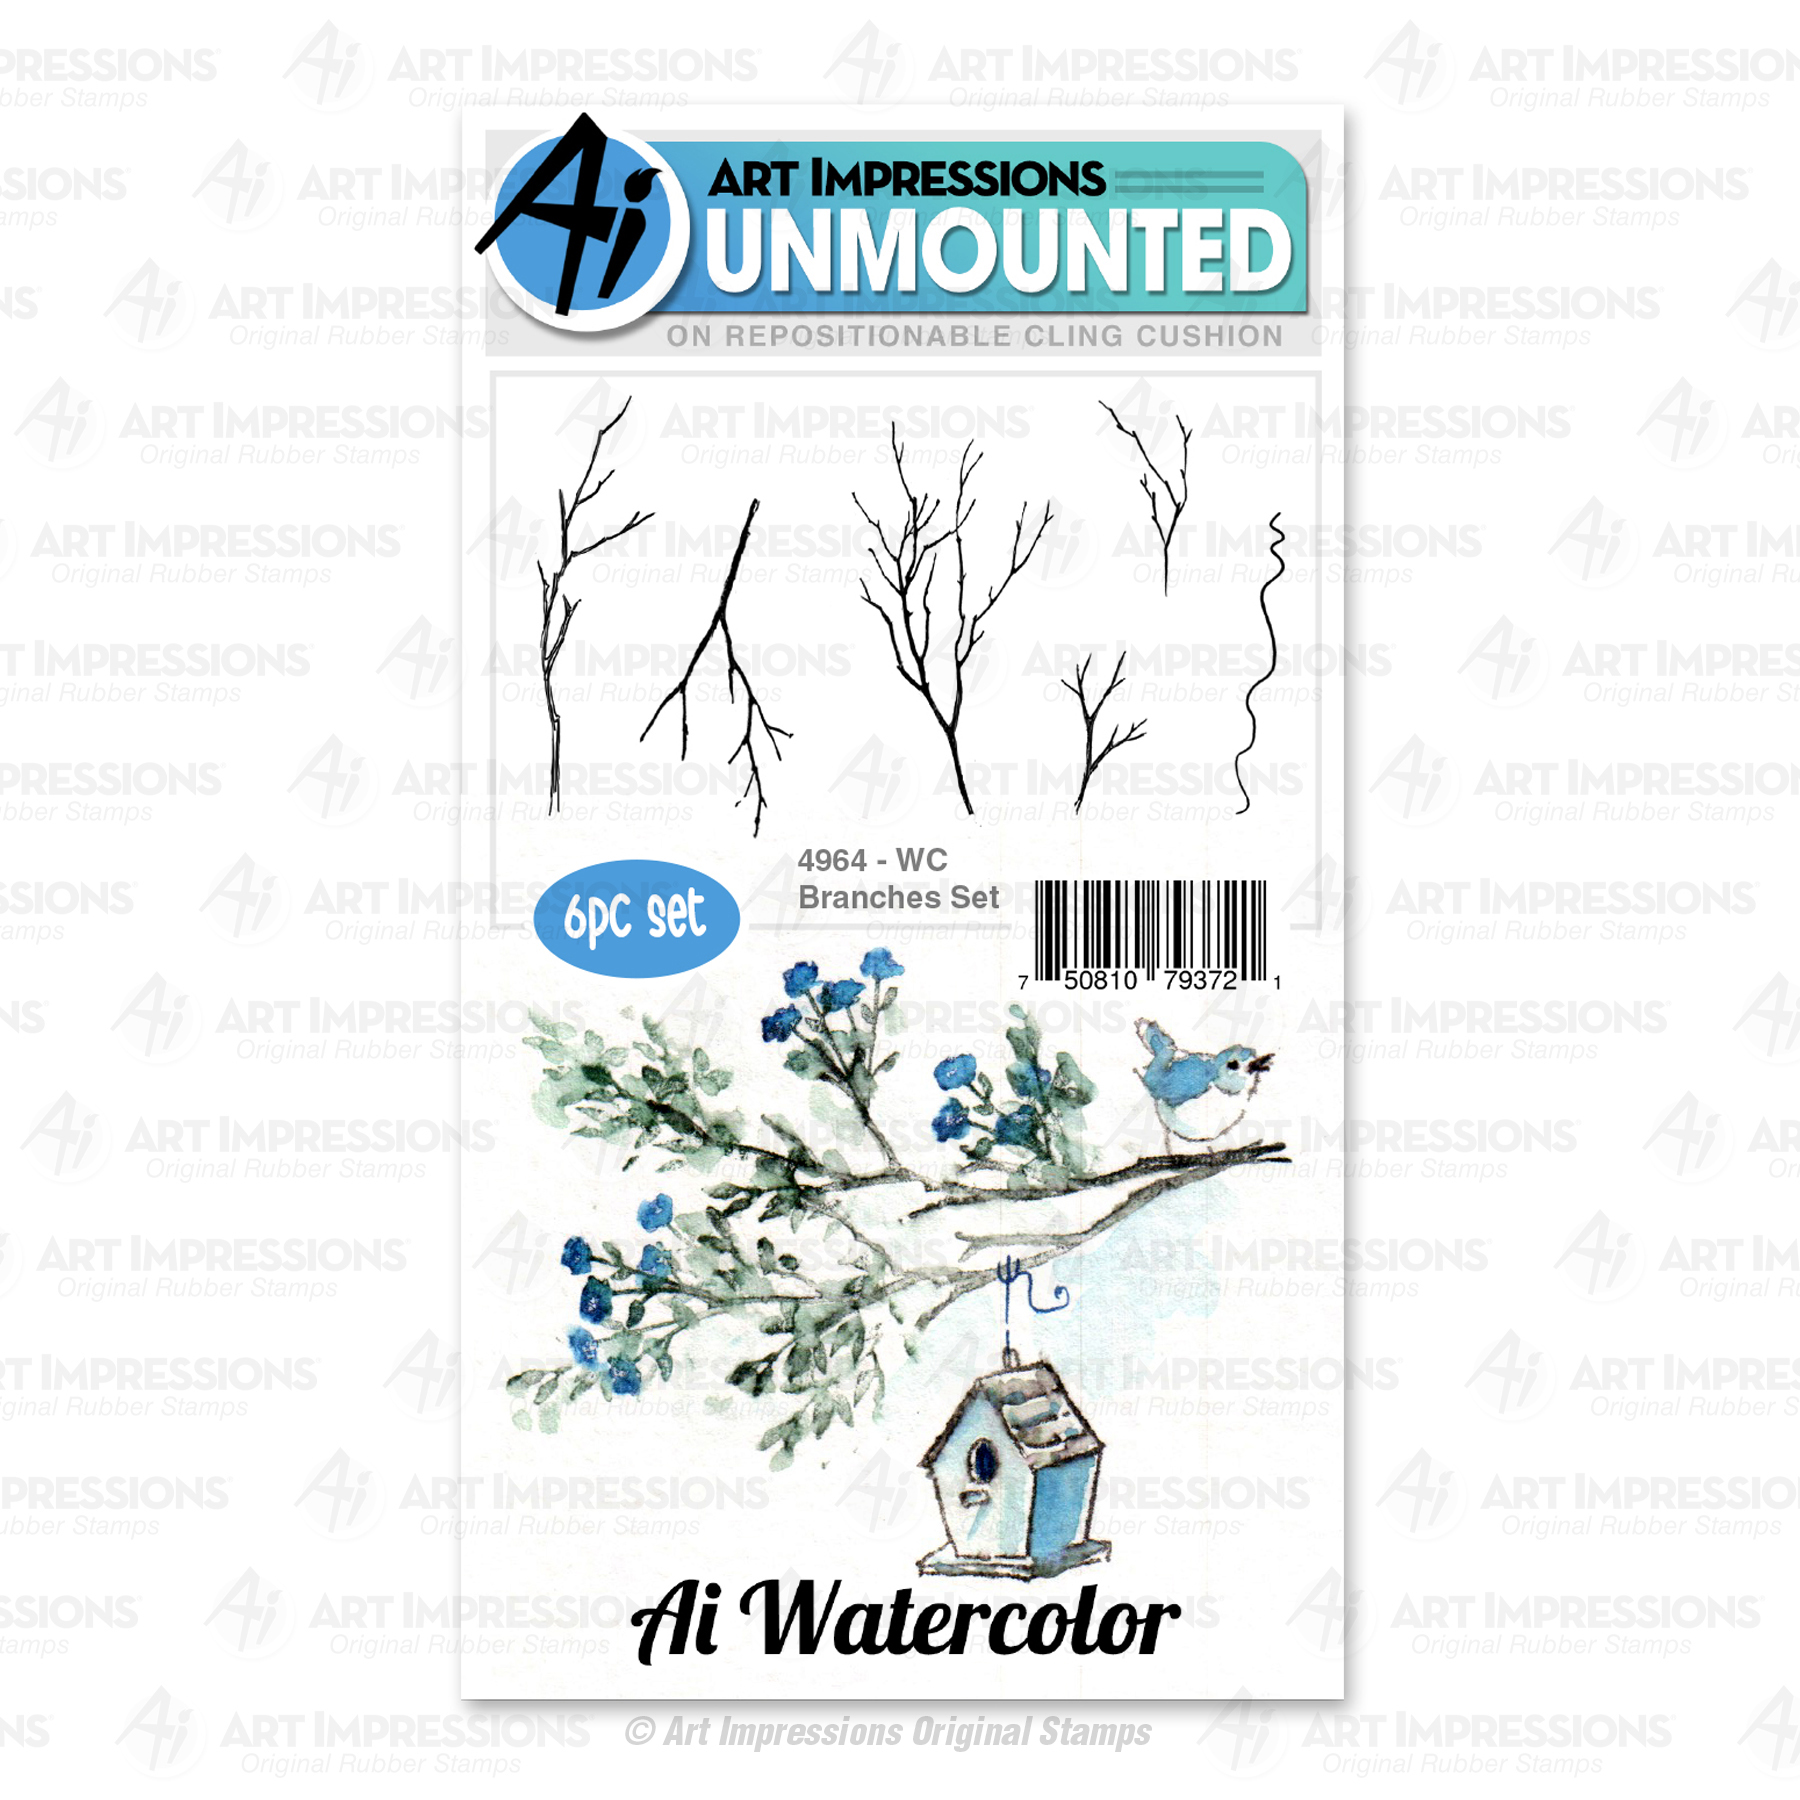 4964 - WC Branches Set